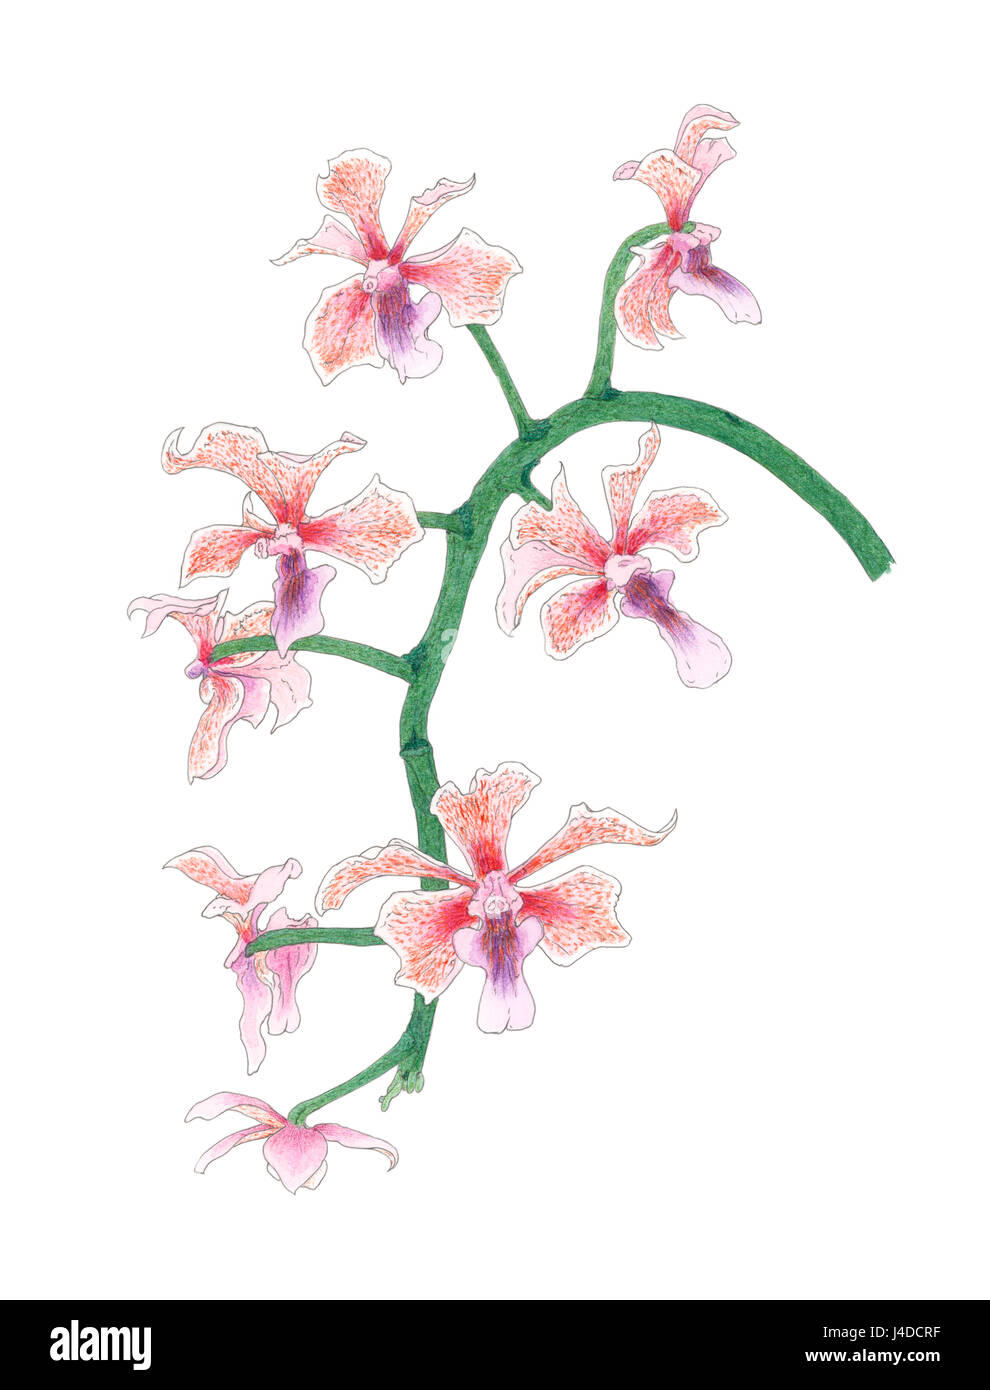 Vanda orchid (Vanda tricolor, cultivar) inflorescence over white background. Colored pencils and watercolor on paper. Stock Photo